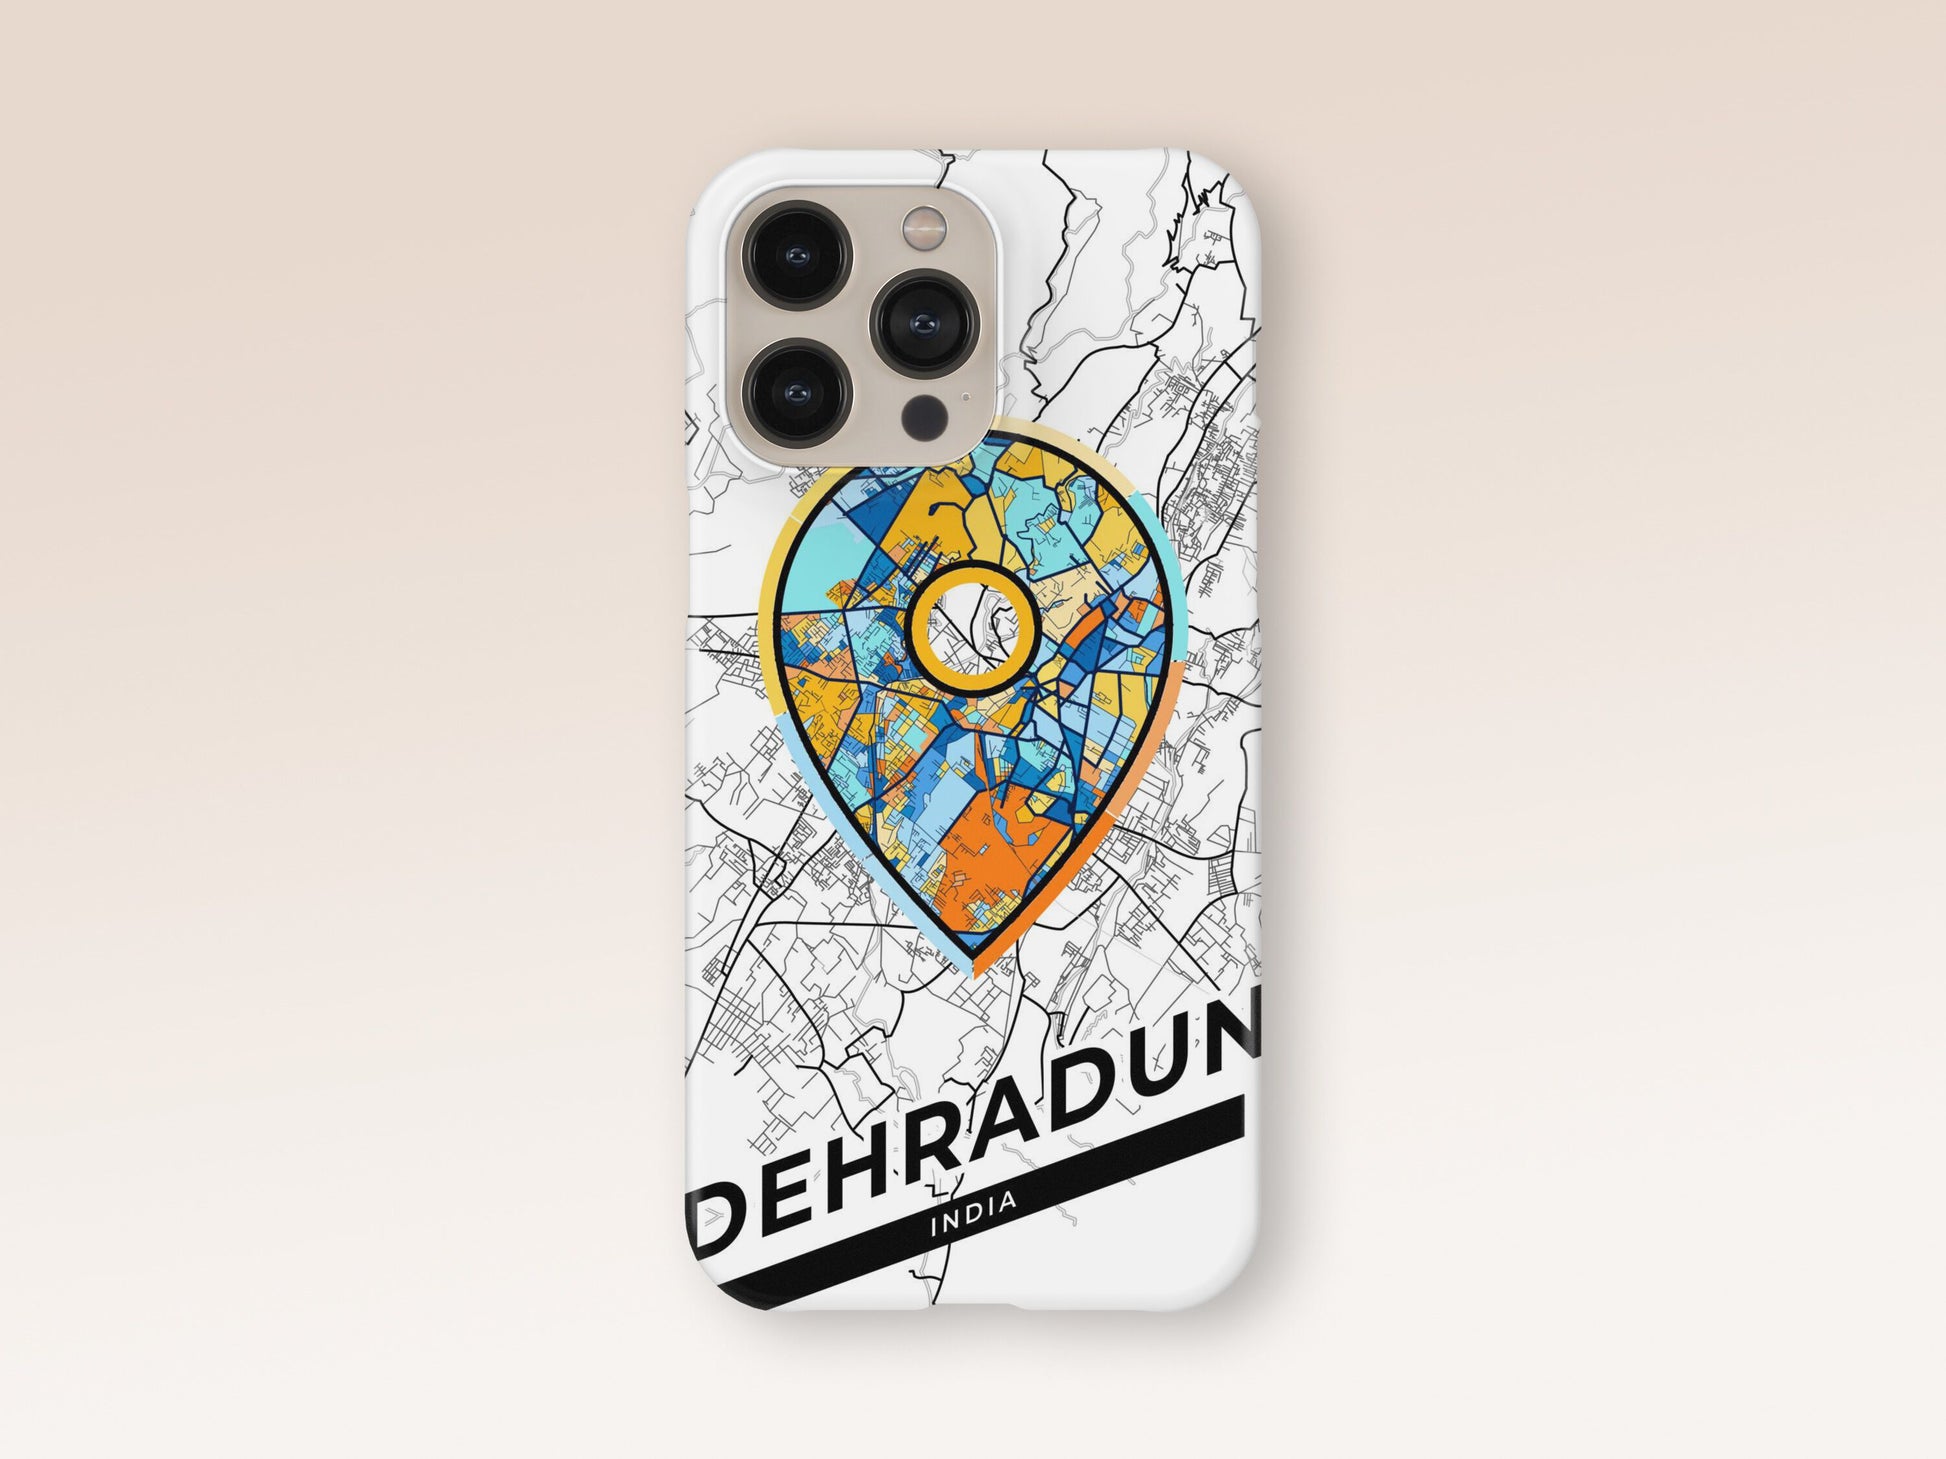 Dehradun India slim phone case with colorful icon. Birthday, wedding or housewarming gift. Couple match cases. 1